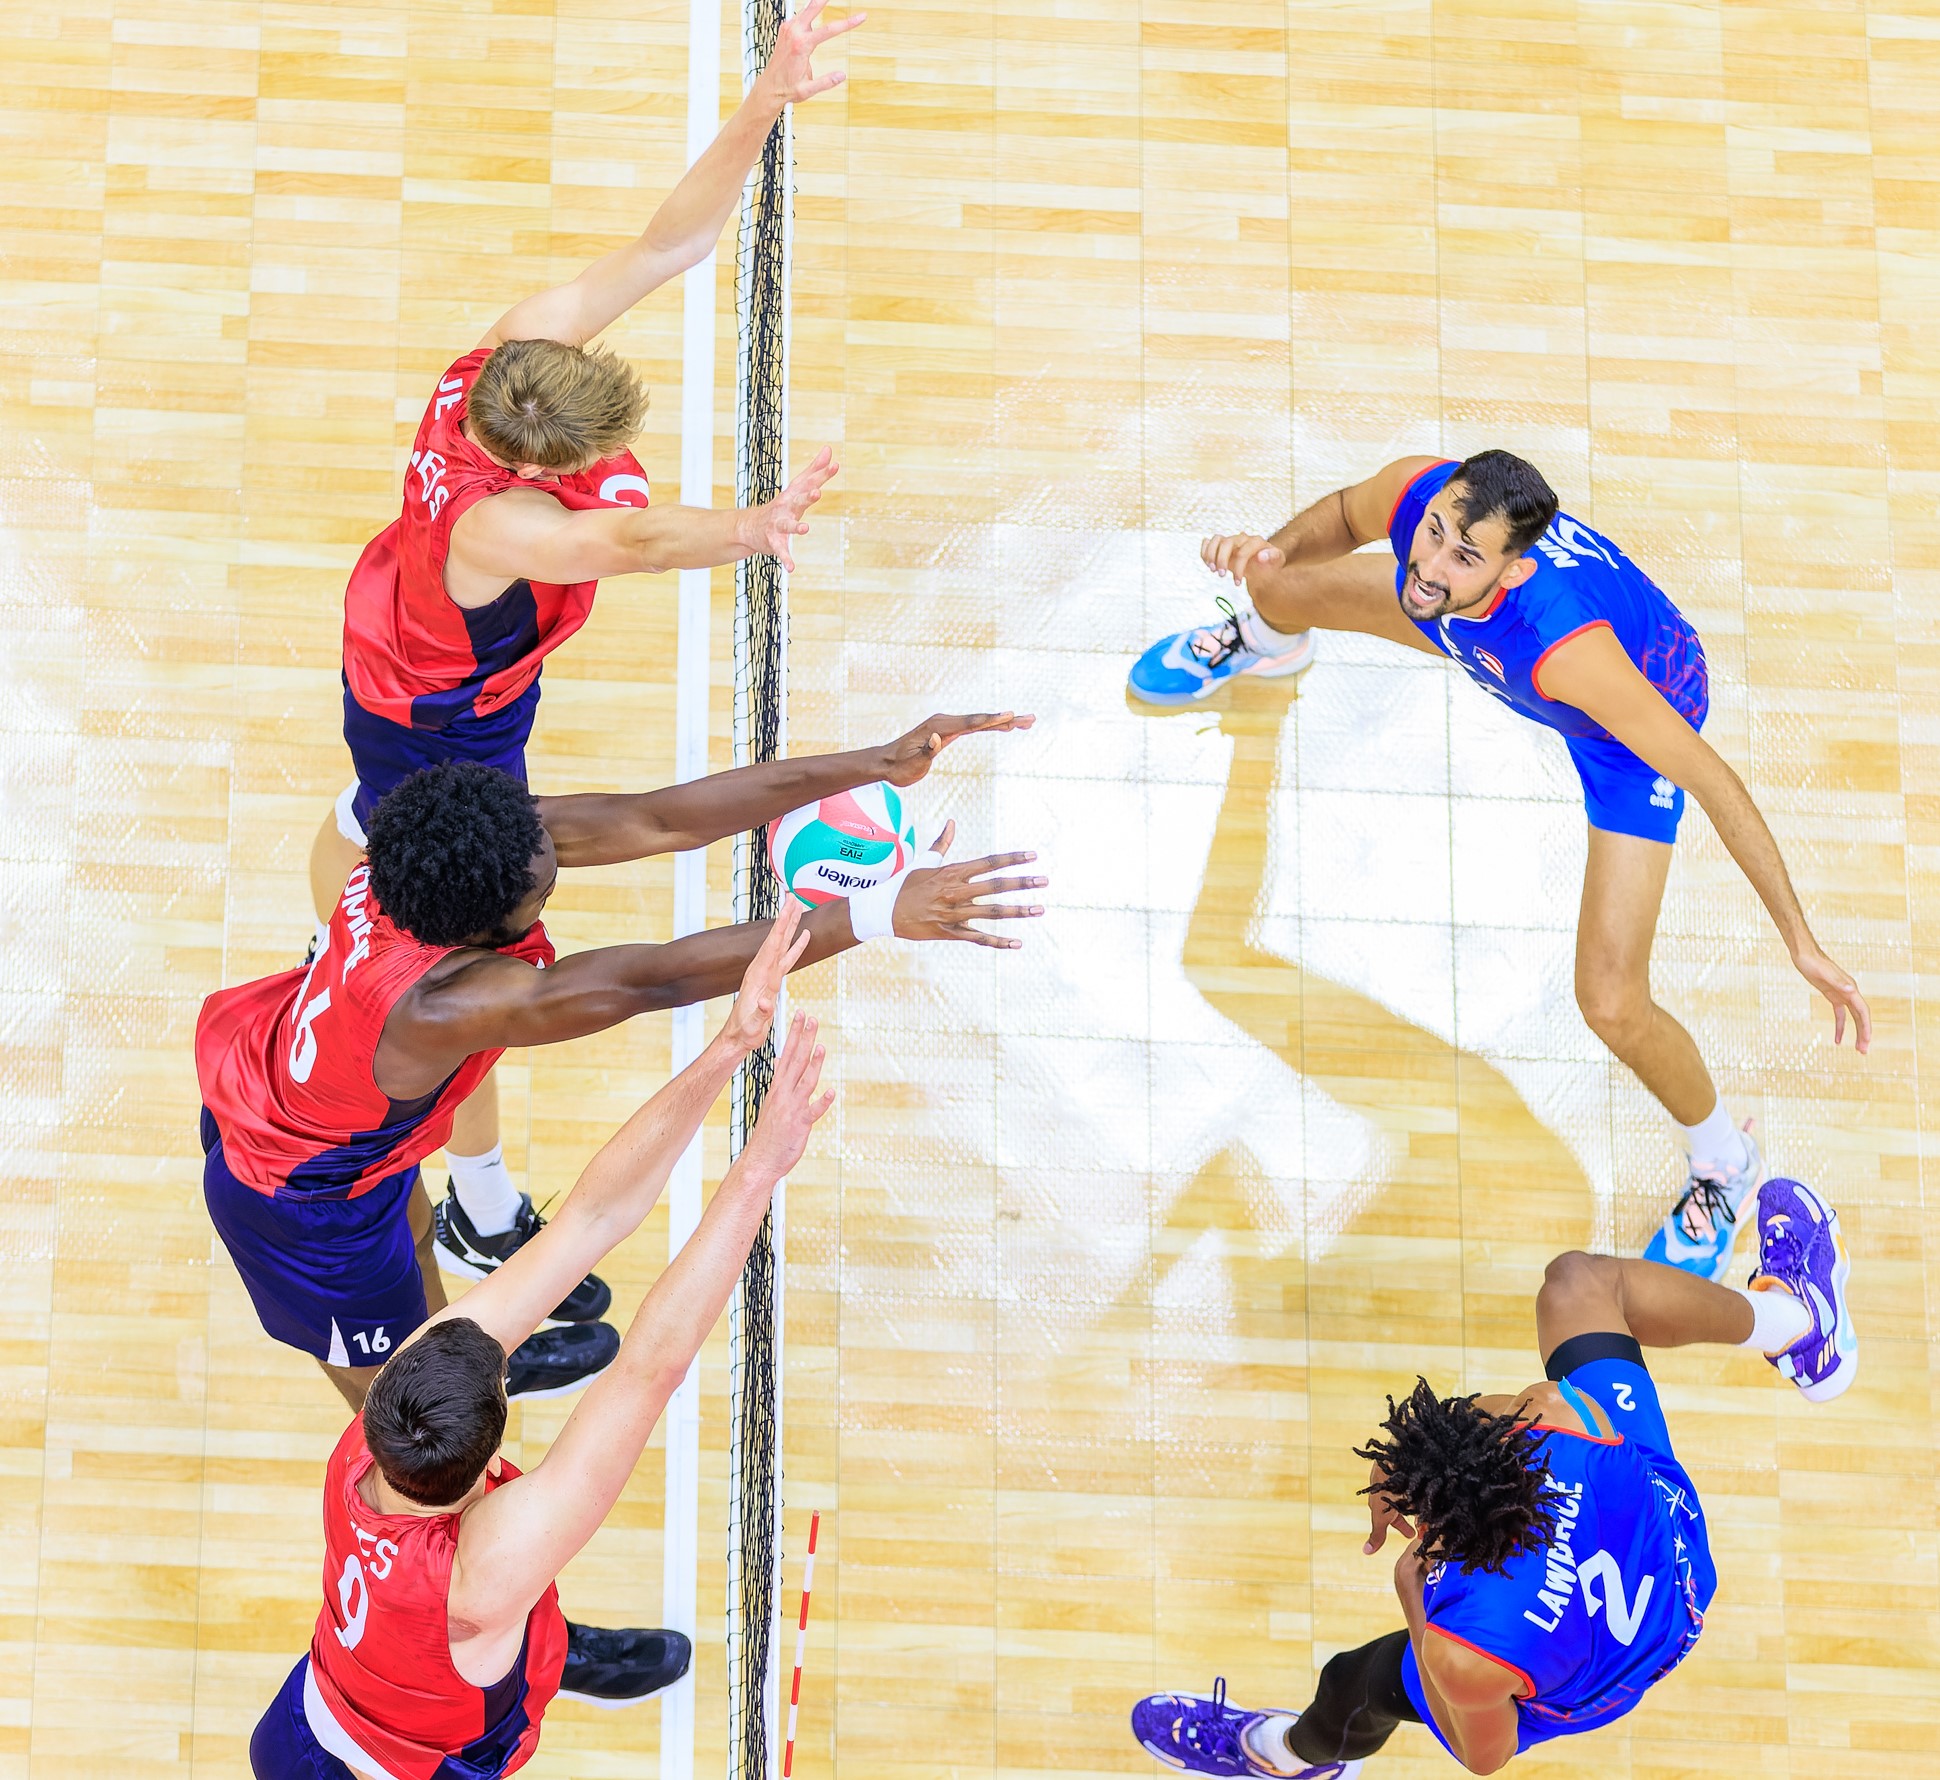 USA sweeps into semis after win over Puerto Rico